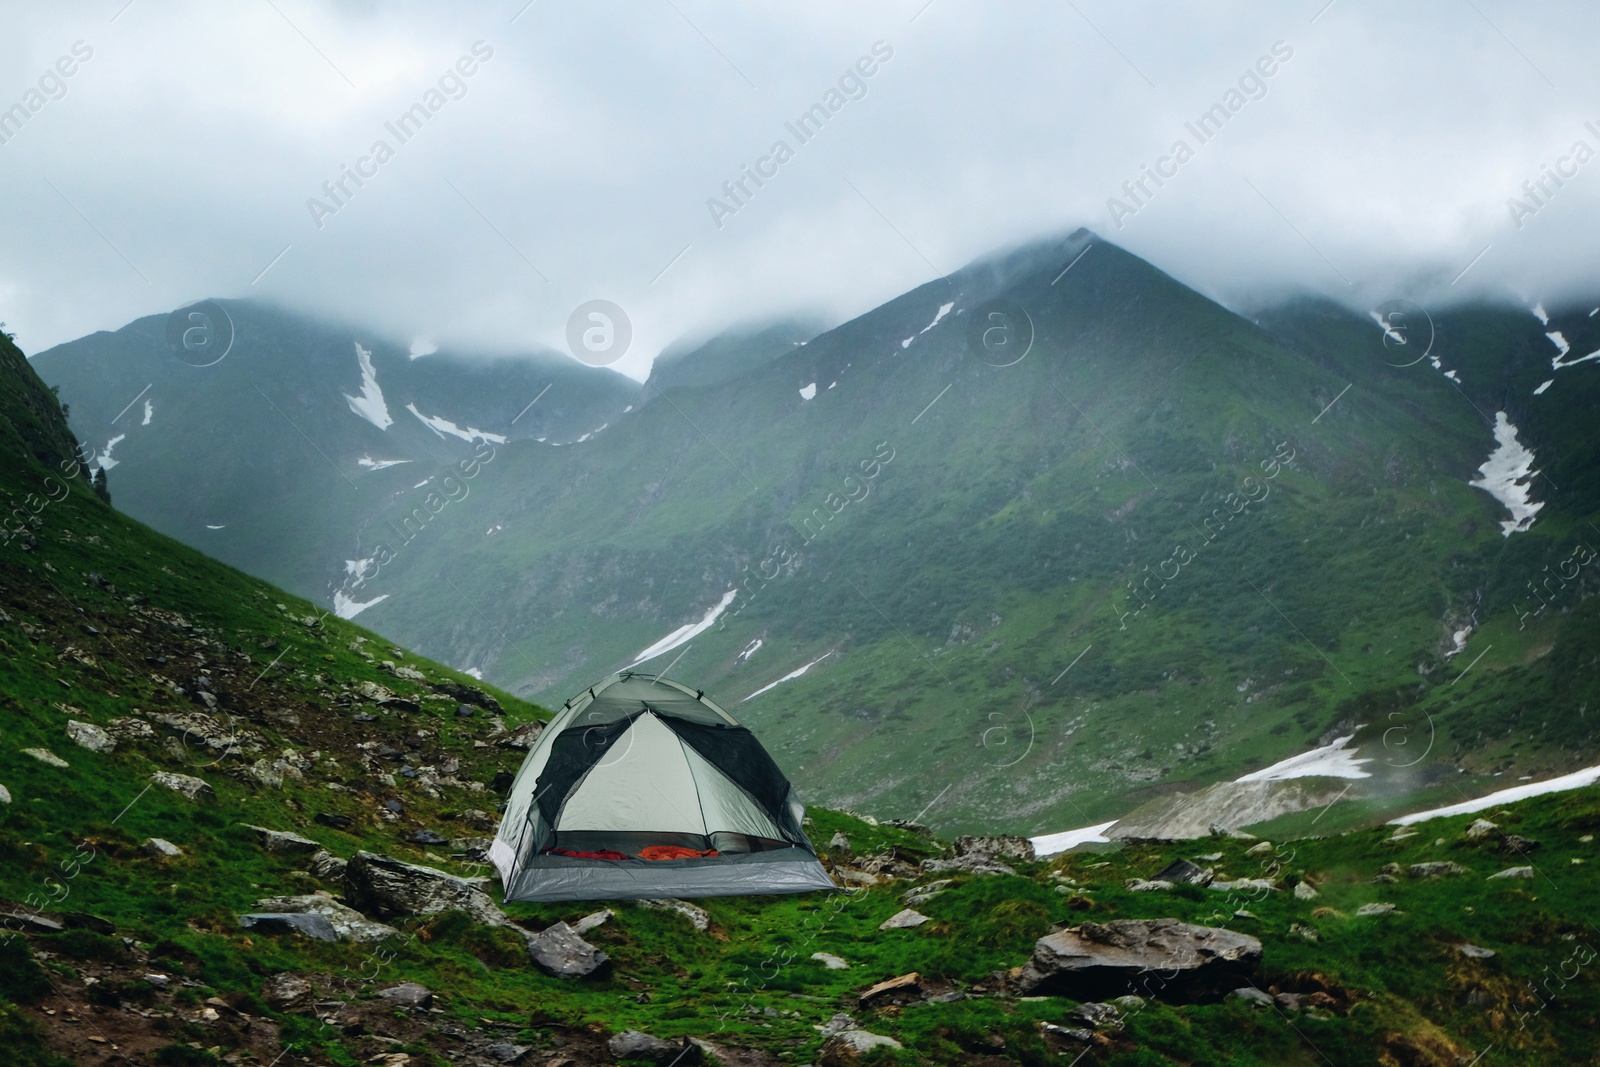 Image of Camping tent with sleeping bags near beautiful foggy mountains